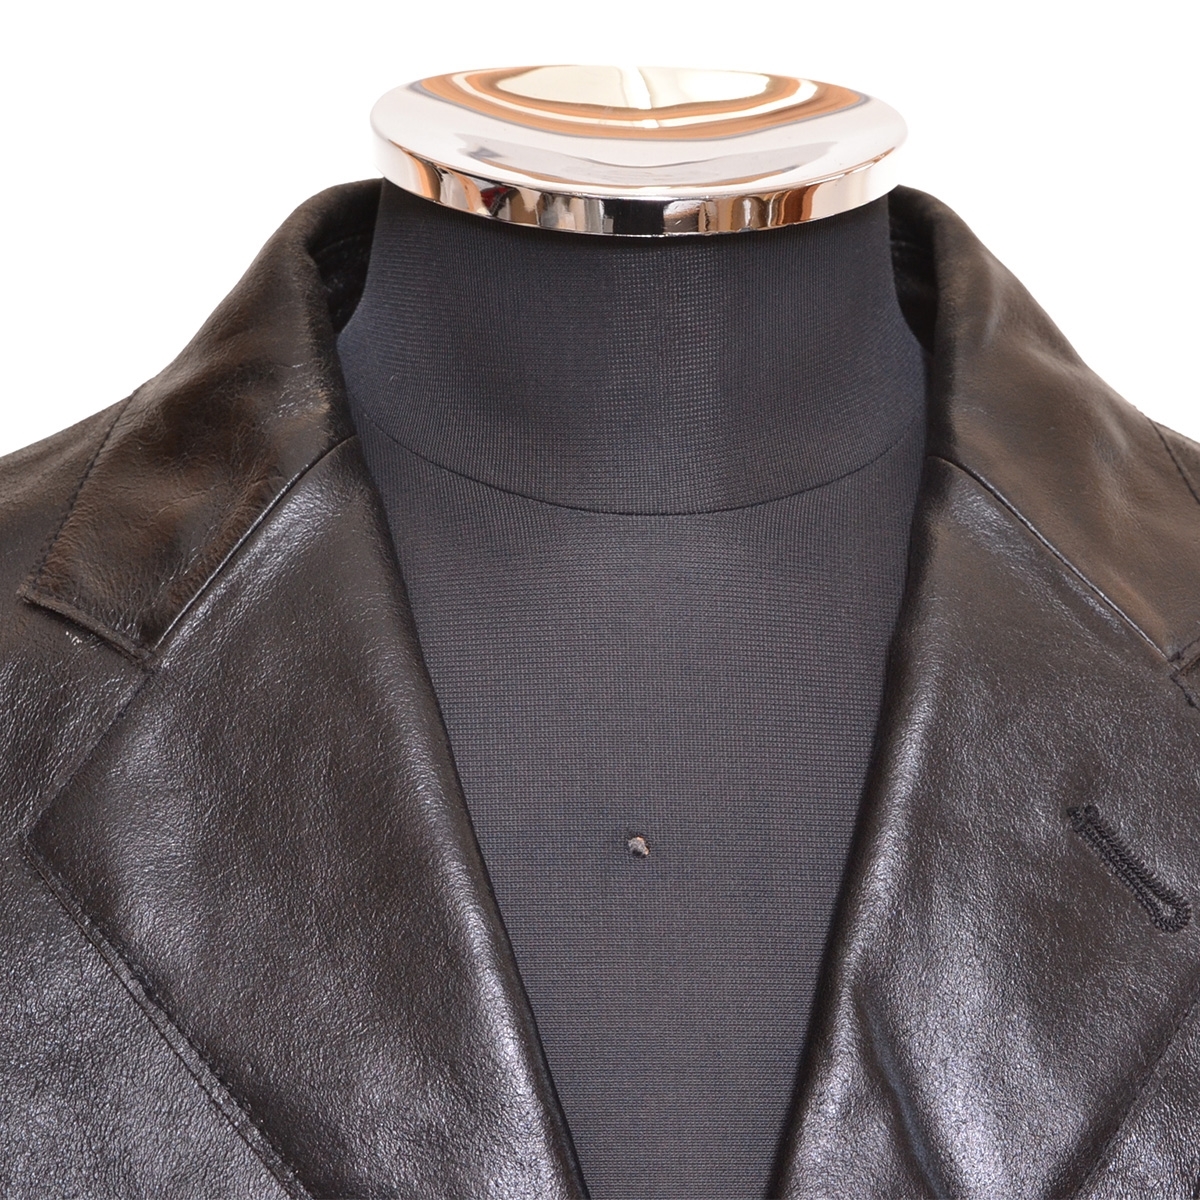 0441633 abx 0 leather tailored jacket size 3 men's black 